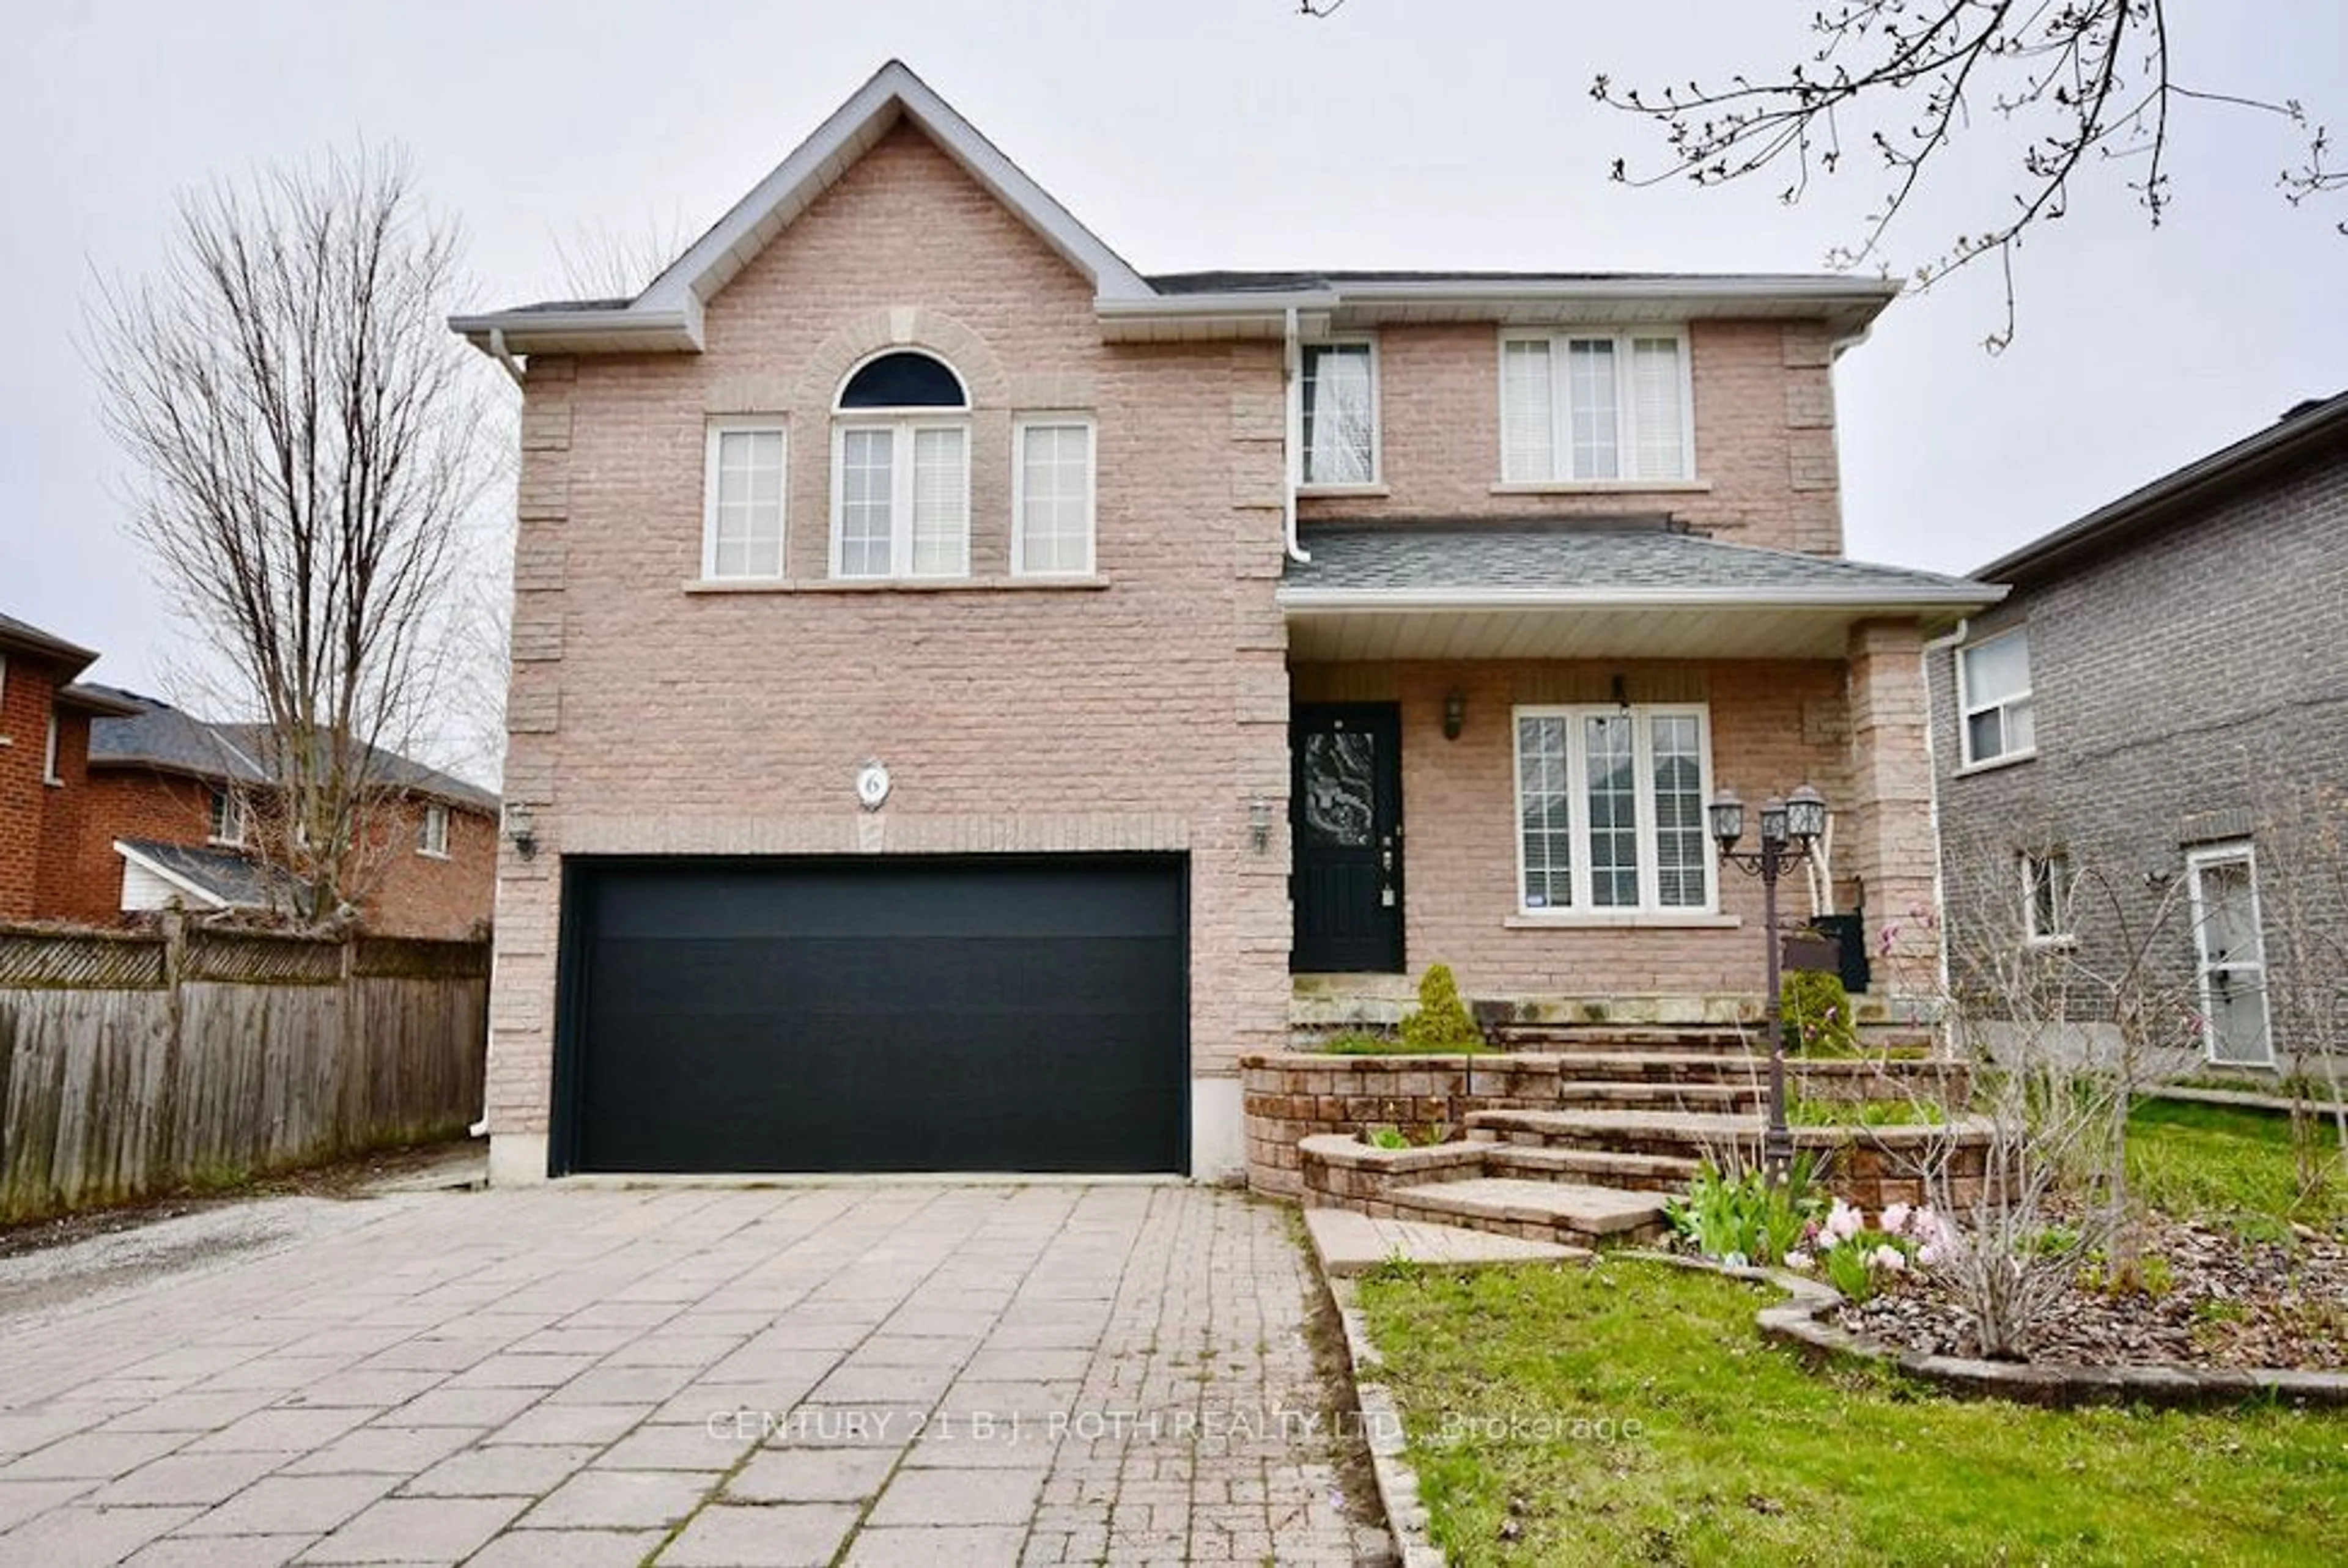 Home with brick exterior material for 6 Joseph Cres, Barrie Ontario L4N 0X9